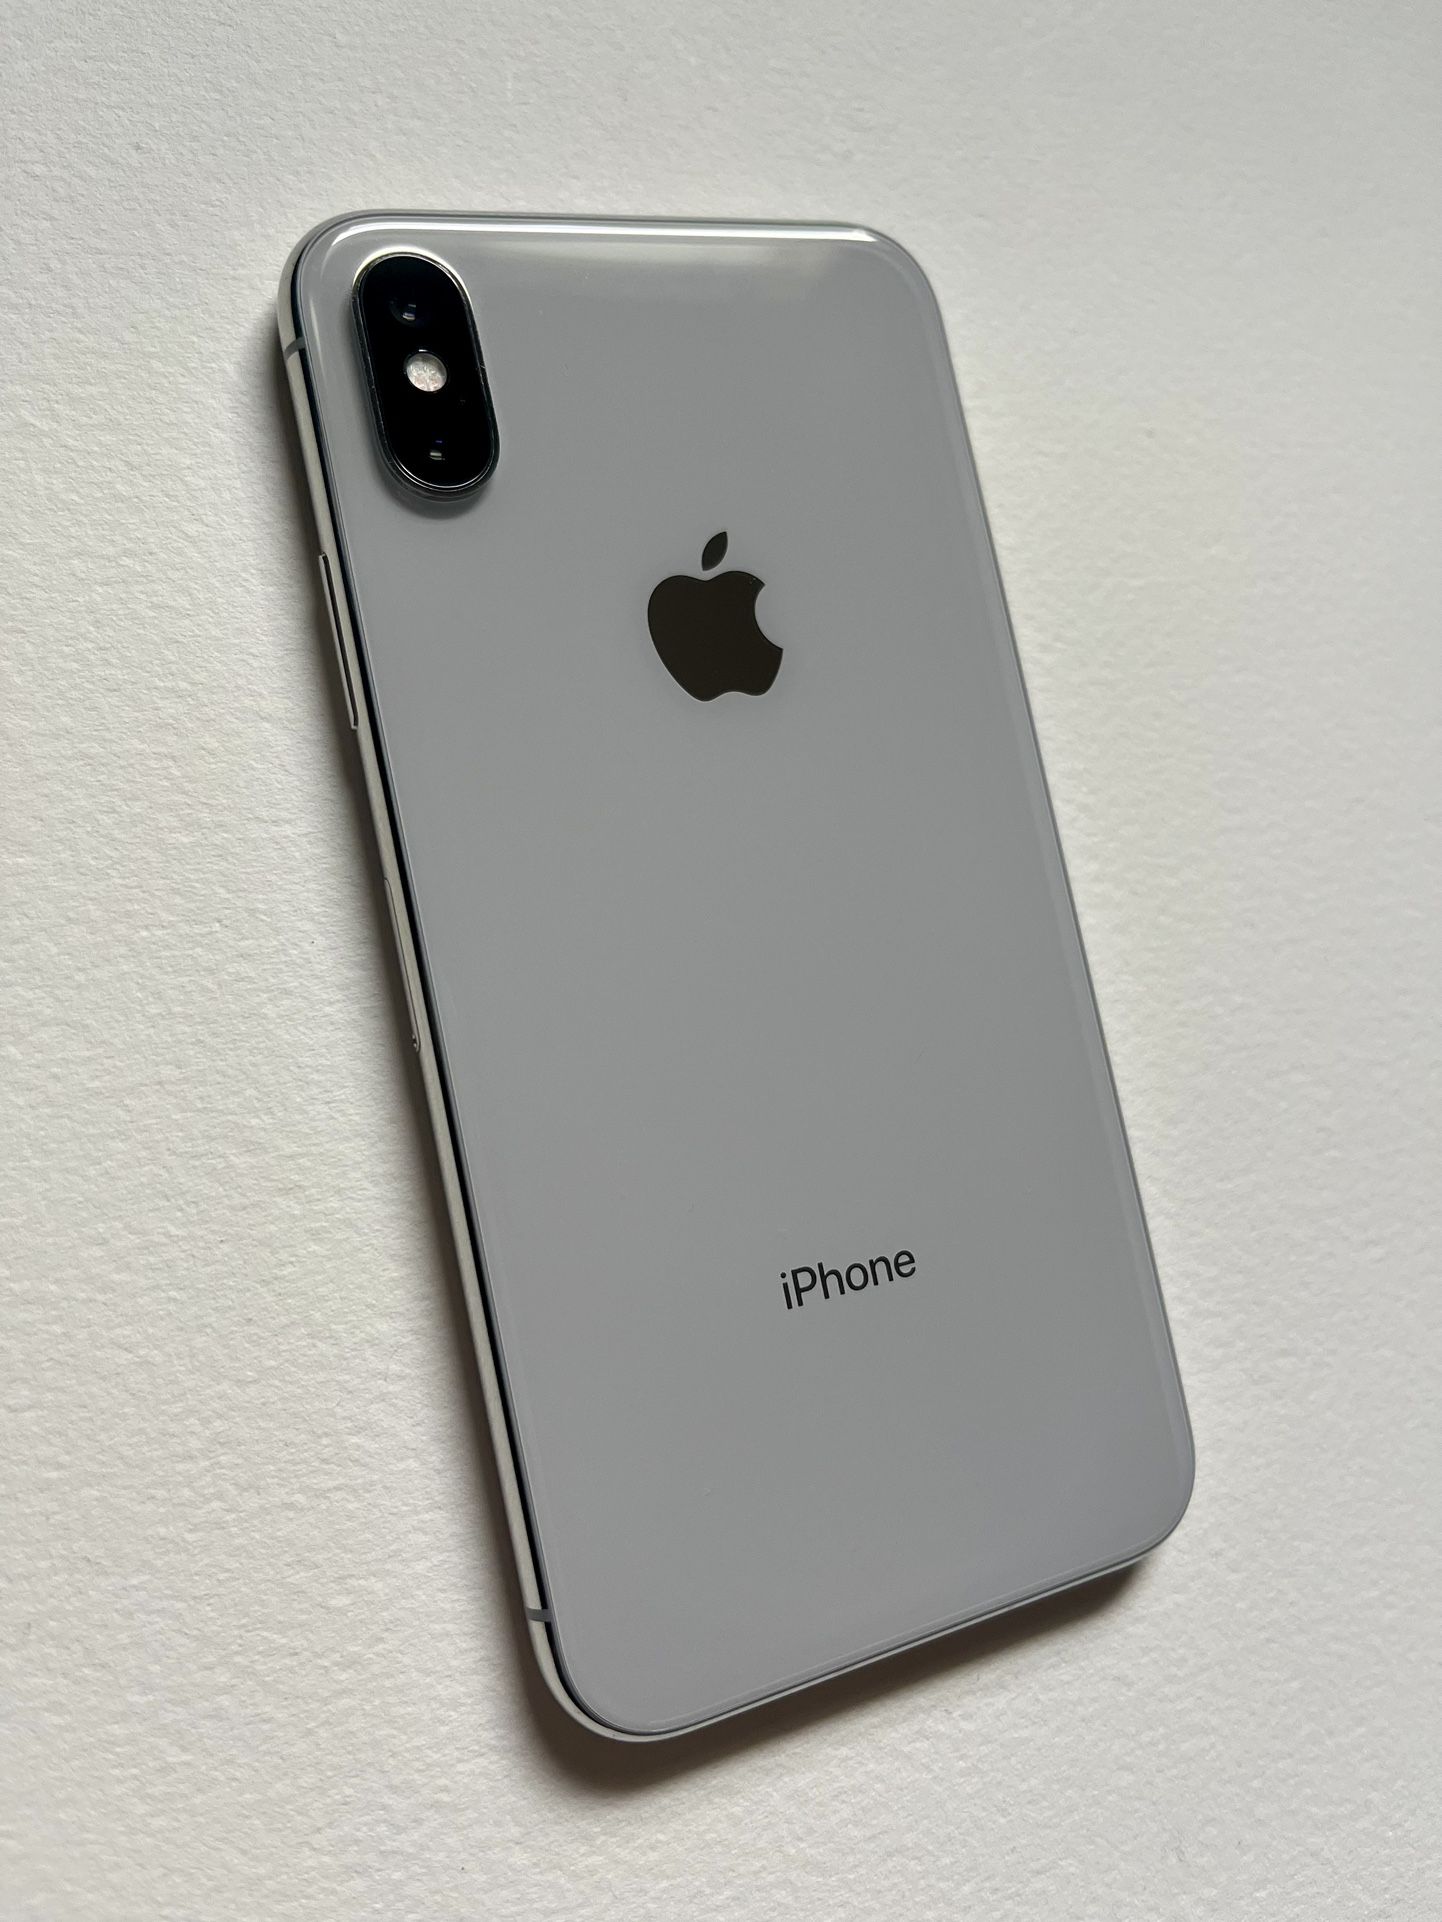 iPhone X At&T 256gb Silver